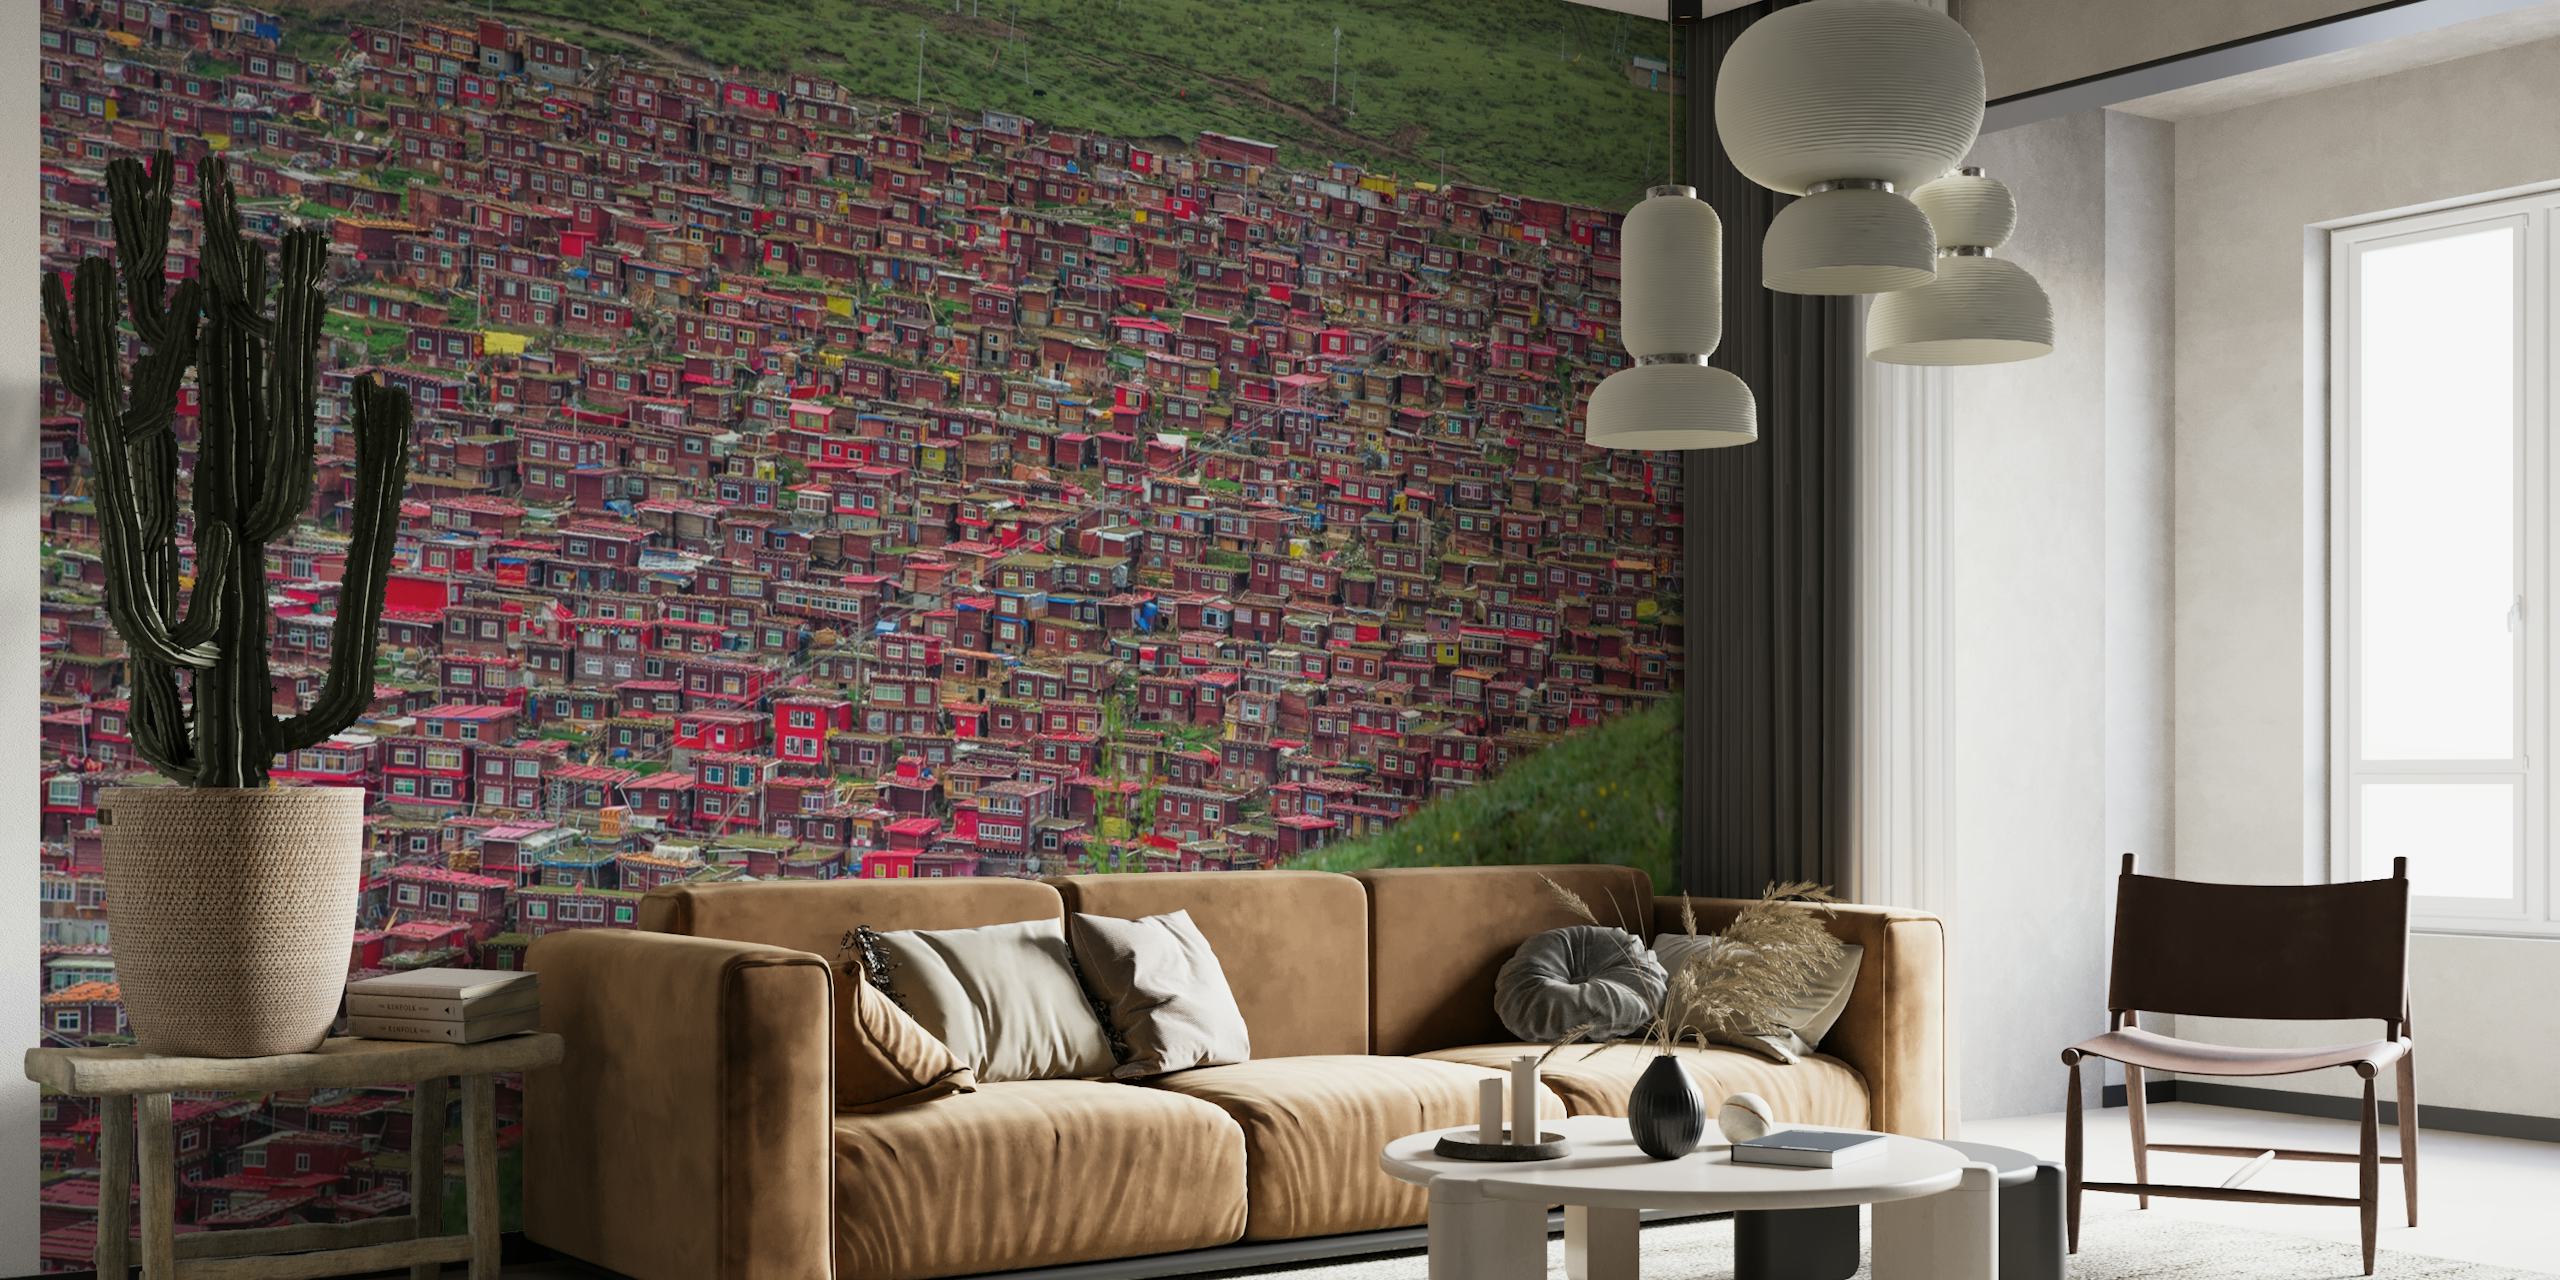 A vast expanse of colorful prayer flags in a Buddhist institute setting wall mural.